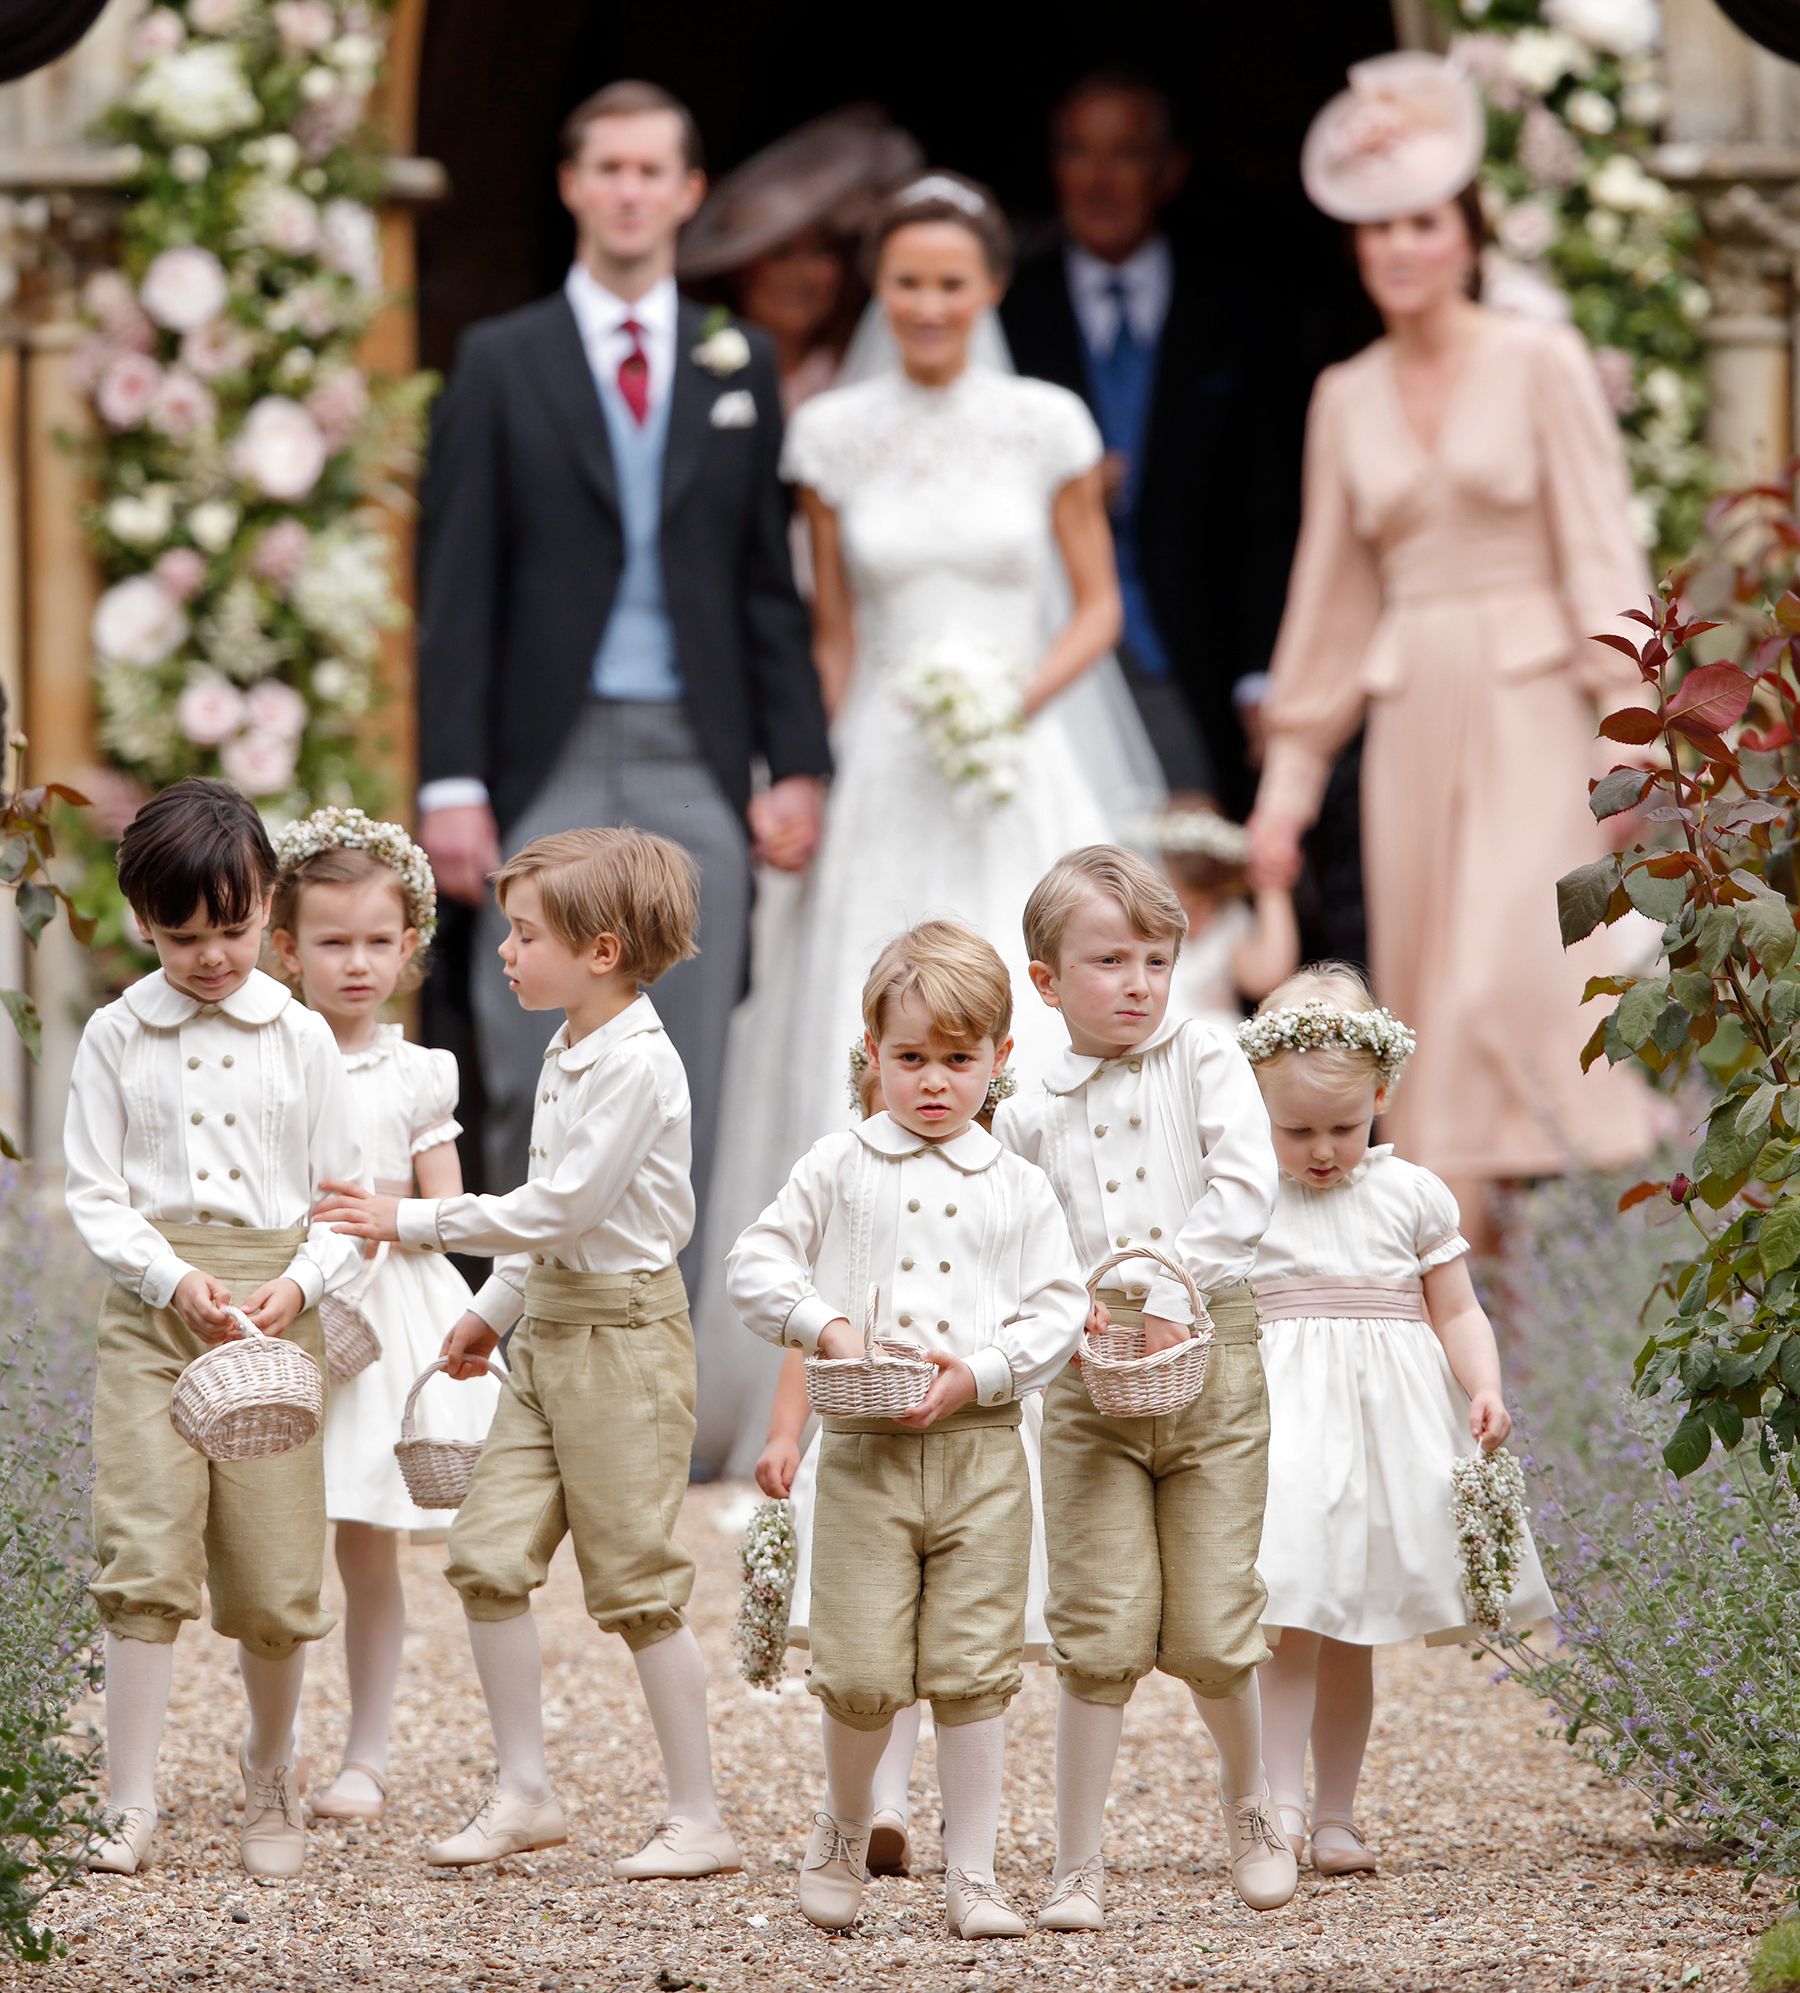 Prince George Is an Adorable Pageboy at Pippa Middleton Wedding – George's  Ring Bearer Outfit